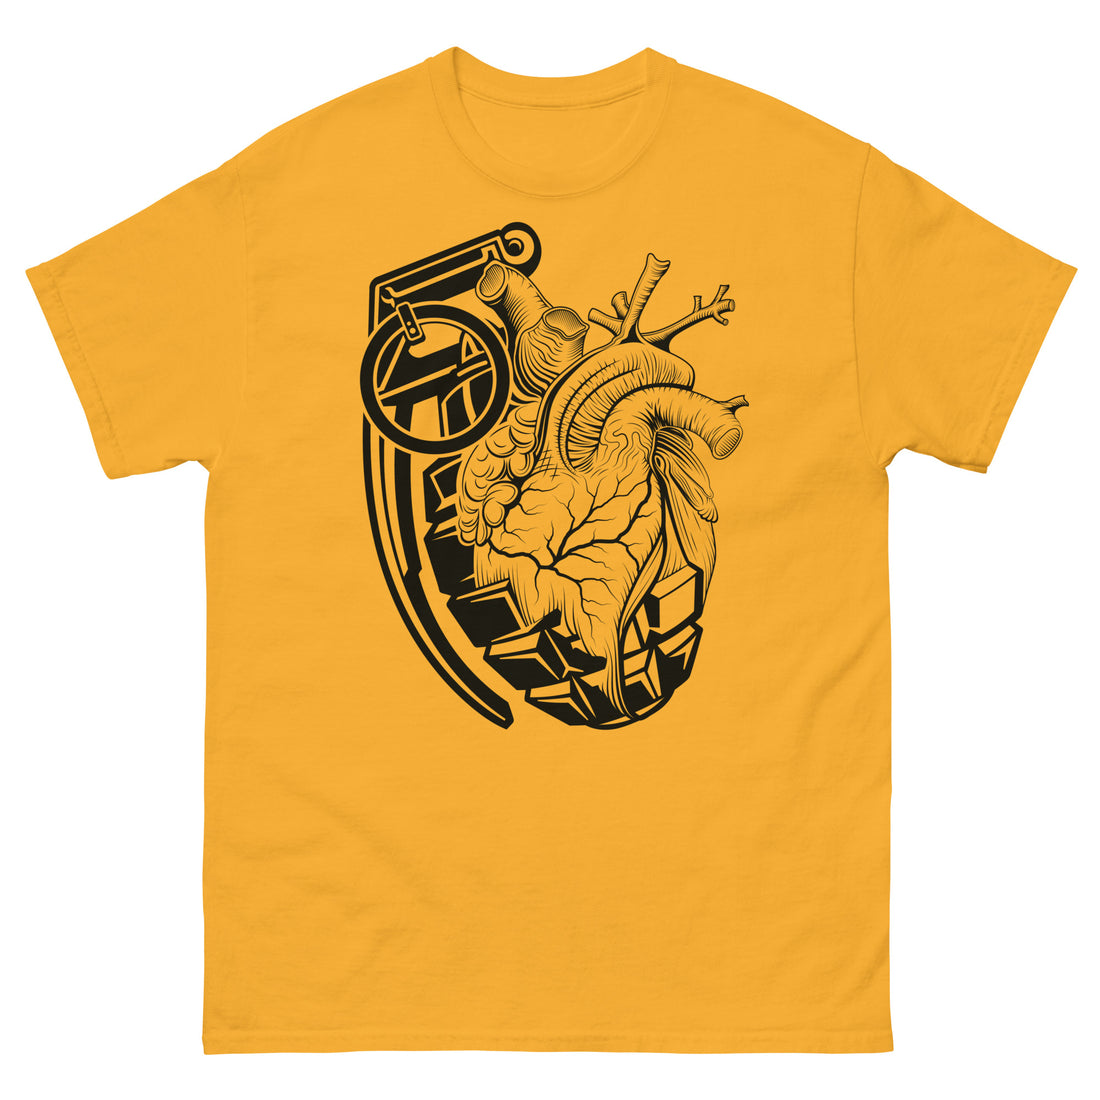 A golden yellow t-shirt with a black grenade of sold color and line work morphing into an anatomical heart drawn using line work and hatching for shading at the top right of the image.